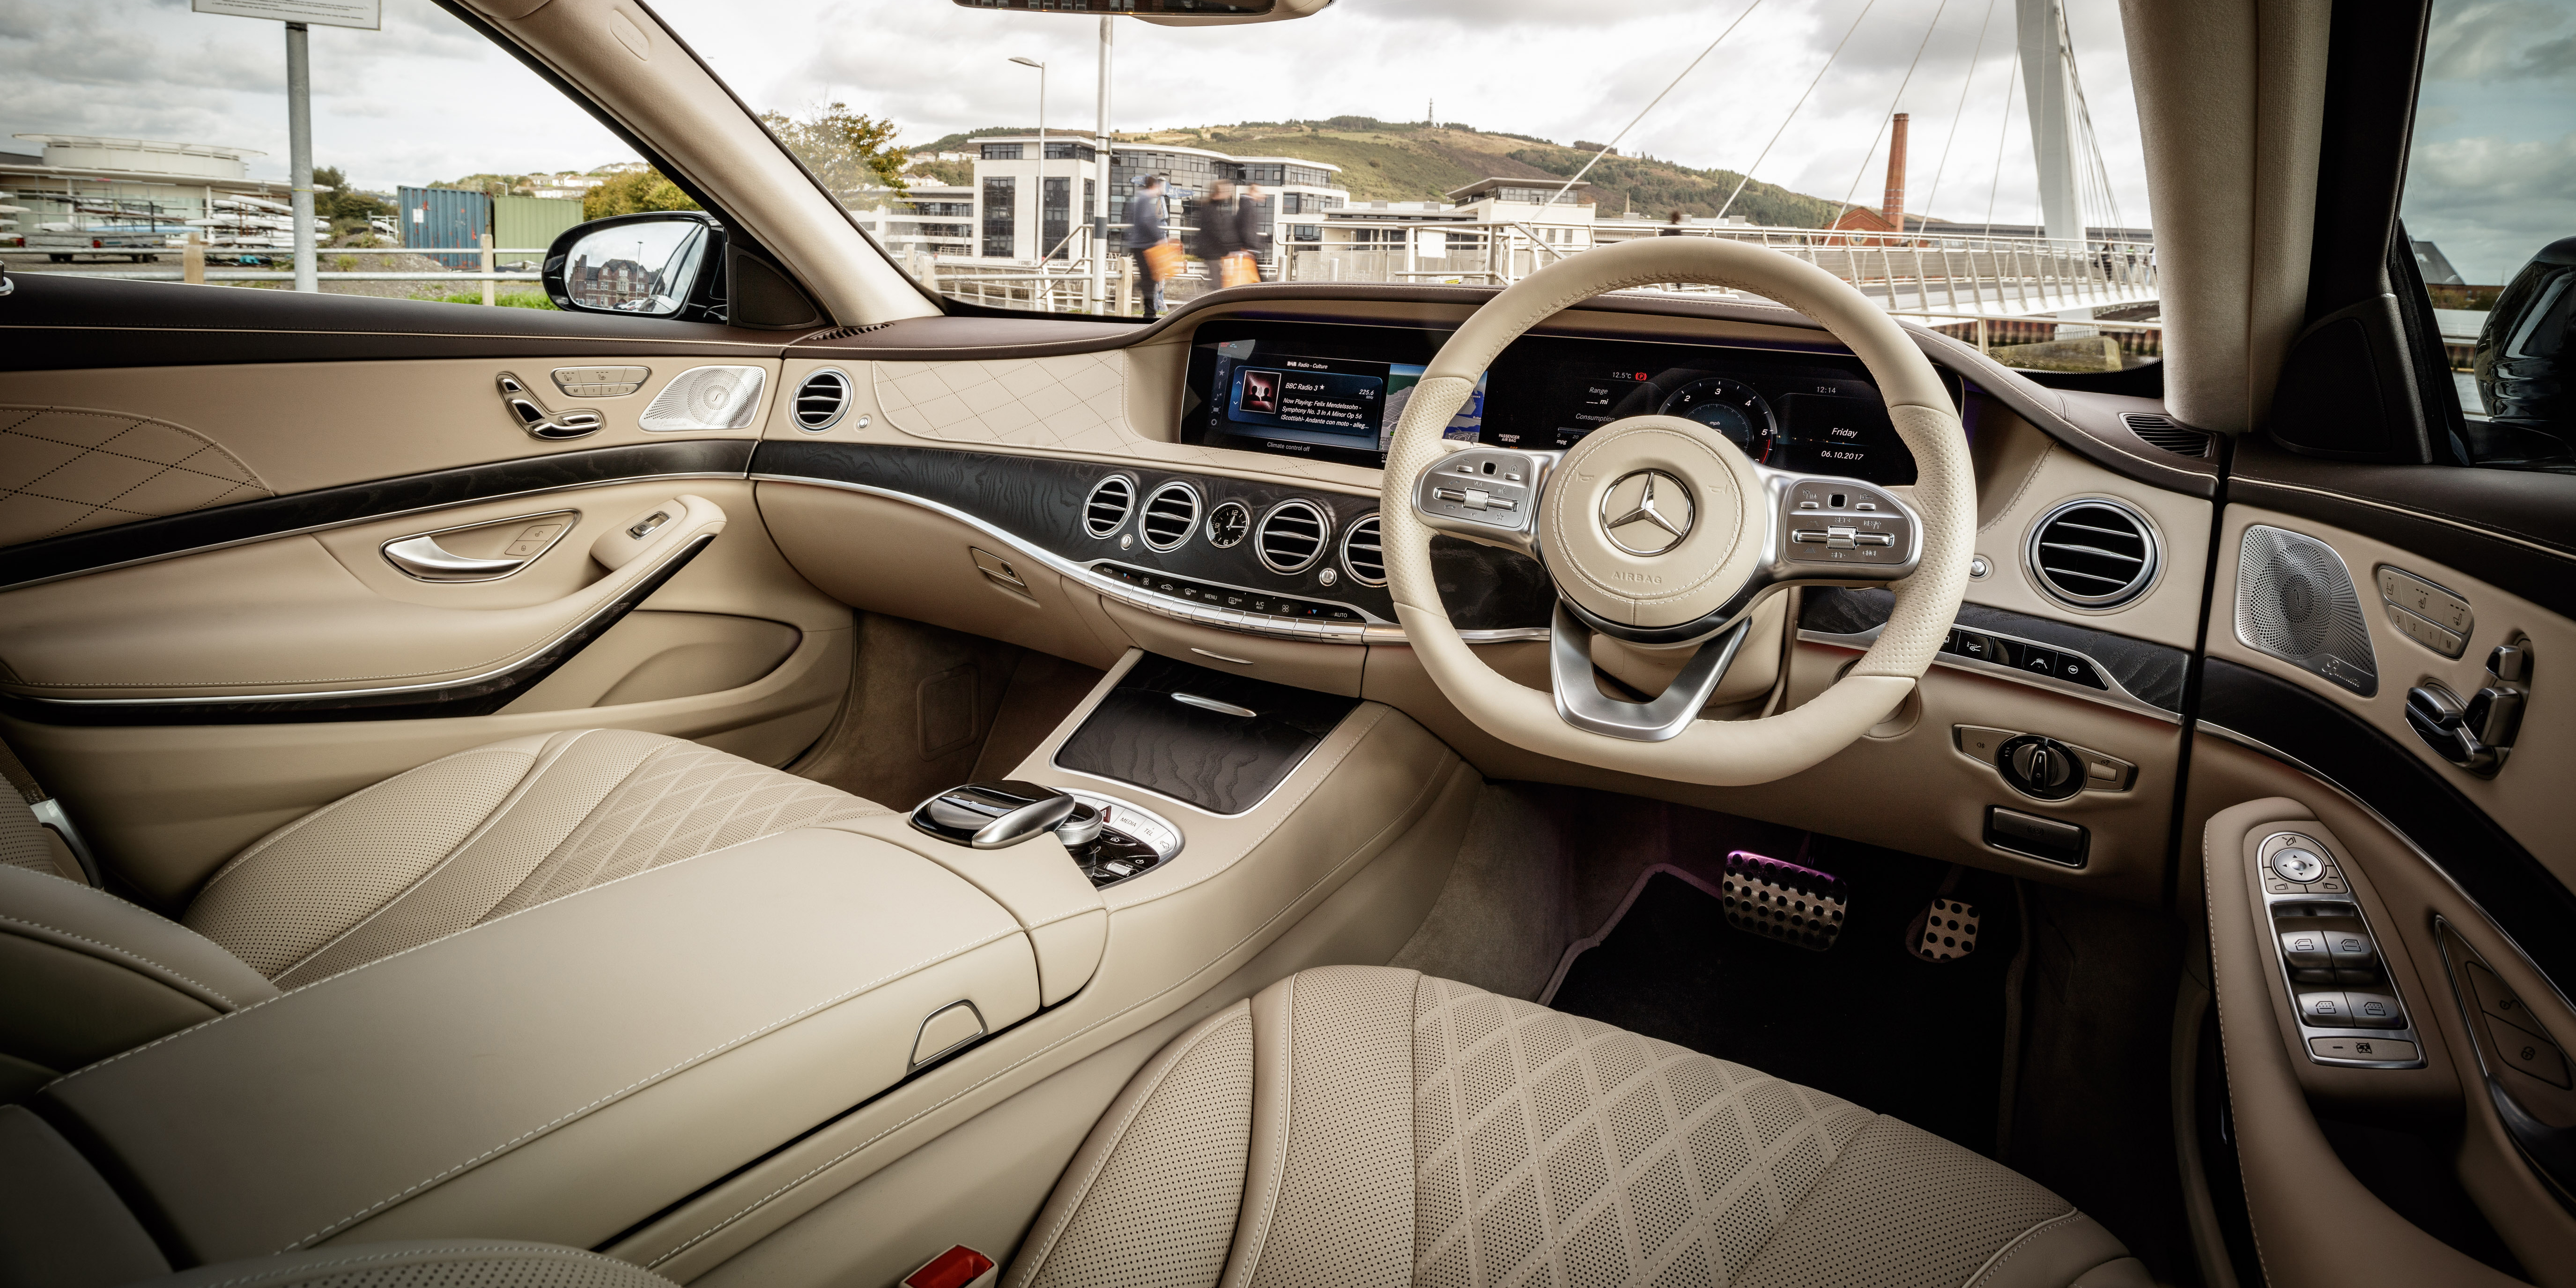 The S-Class has one of the most elegant and luxurious interiors of any car